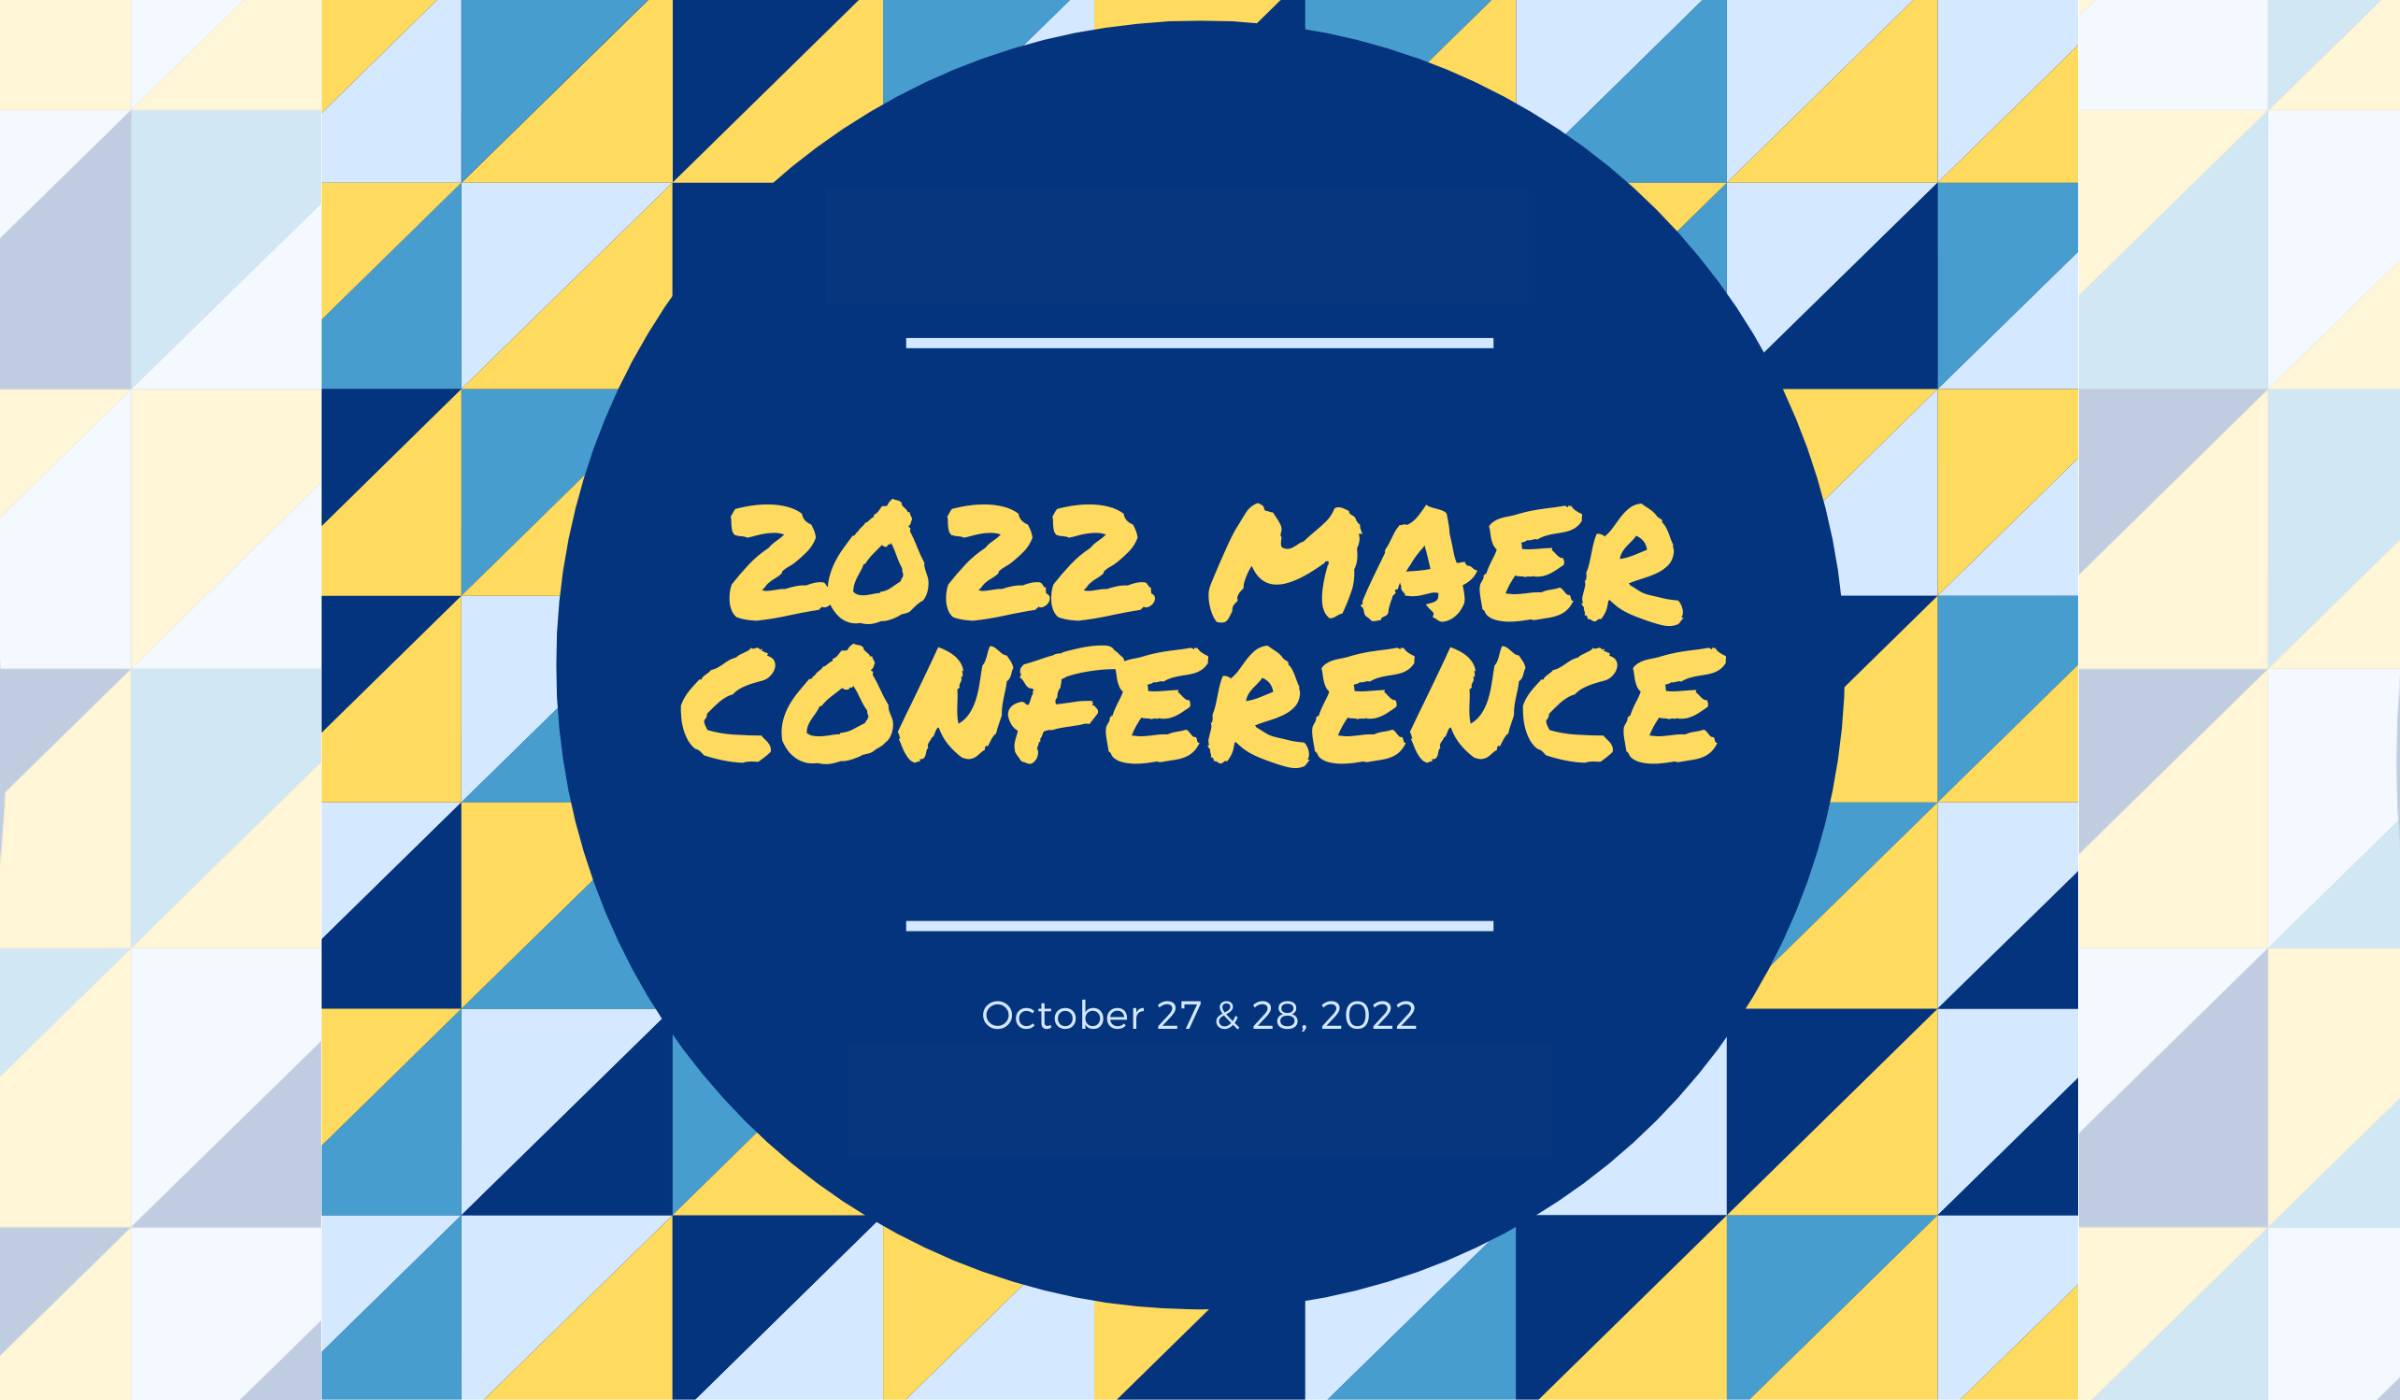 NRTC Presents at 2022 MAER Conference The National Research and